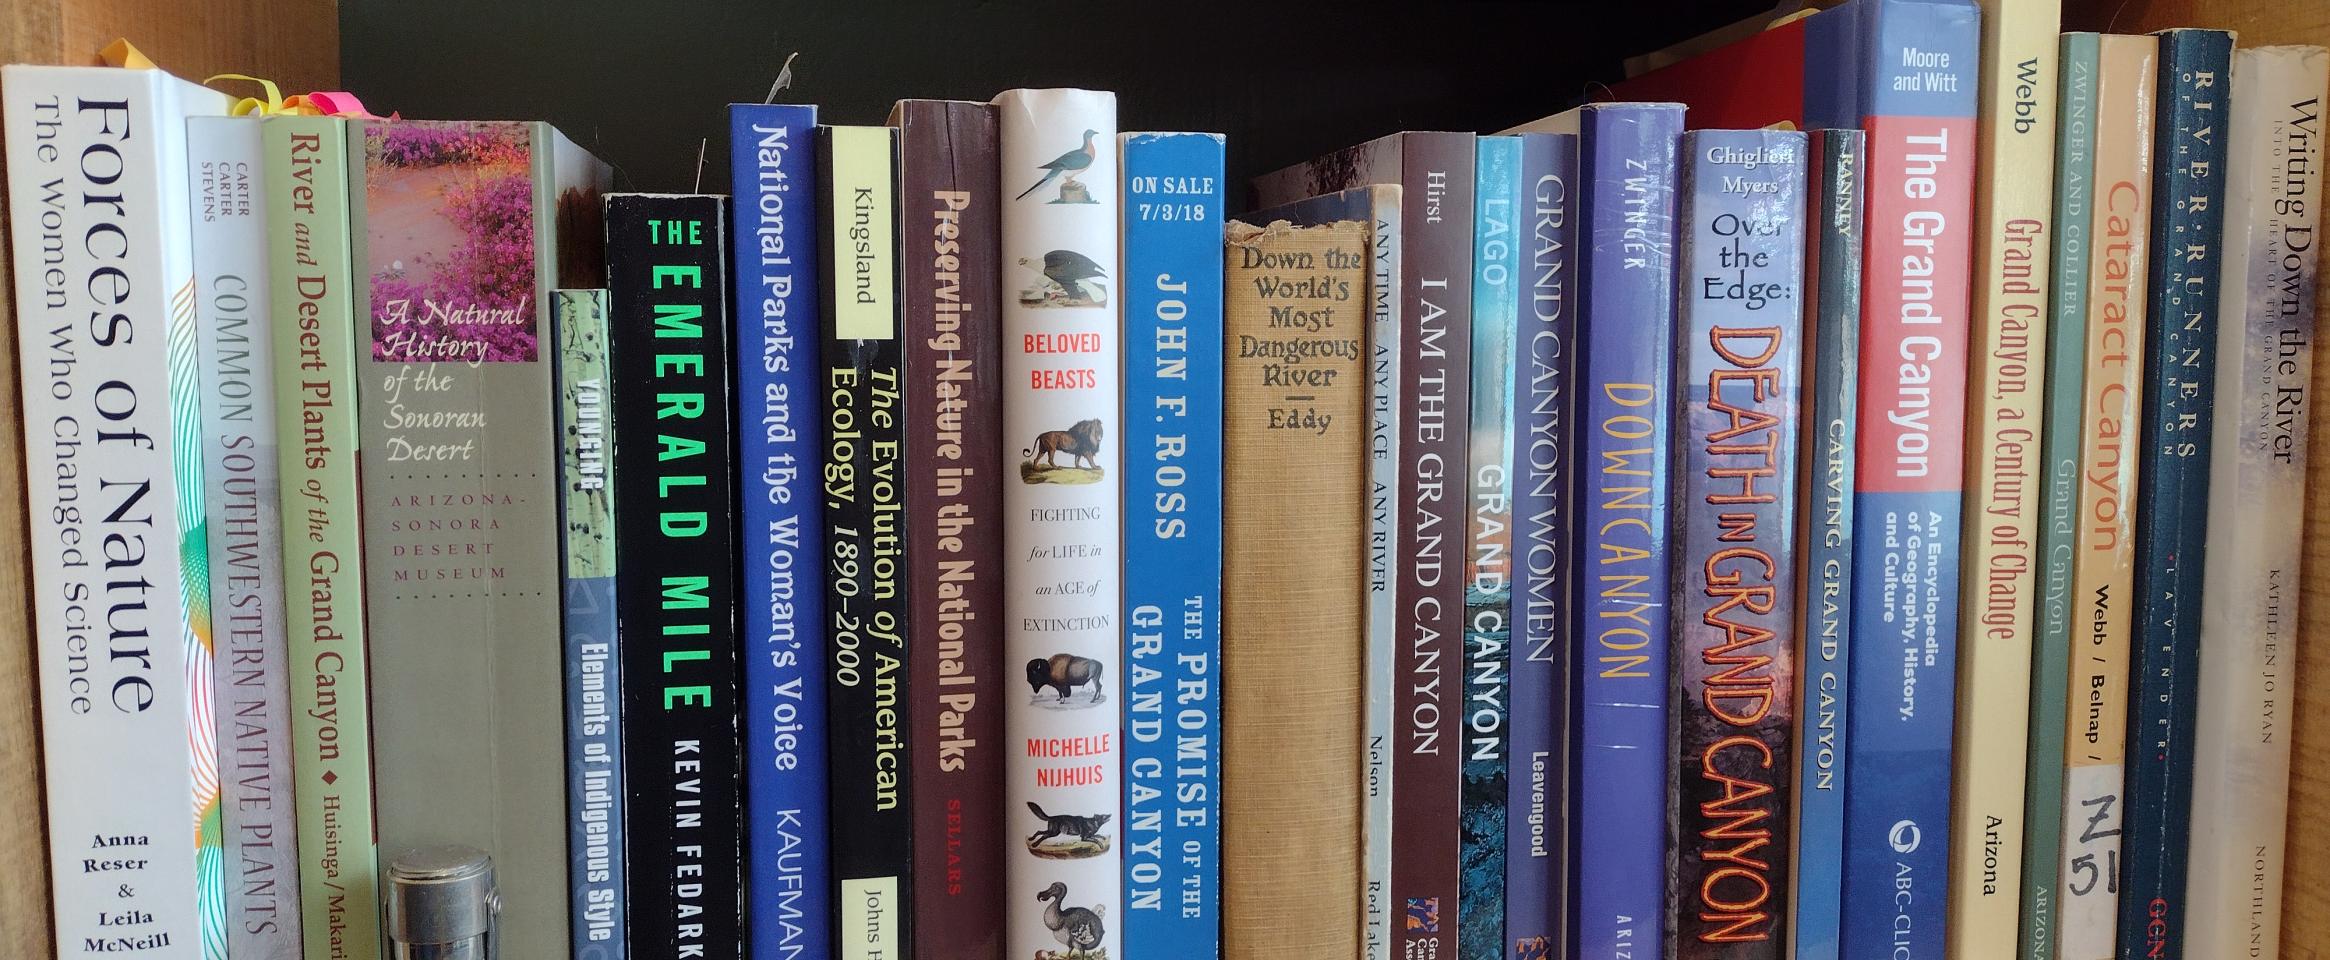 Rectangular photo of Melissa Sevigny’s office bookshelf showing books on the Grand Canyon, botany, and women in science, with waterproof silver match case used by Lois Jotter on 1938 expedition and four Arizona rocks. Photo credit: Melissa Sevigny.